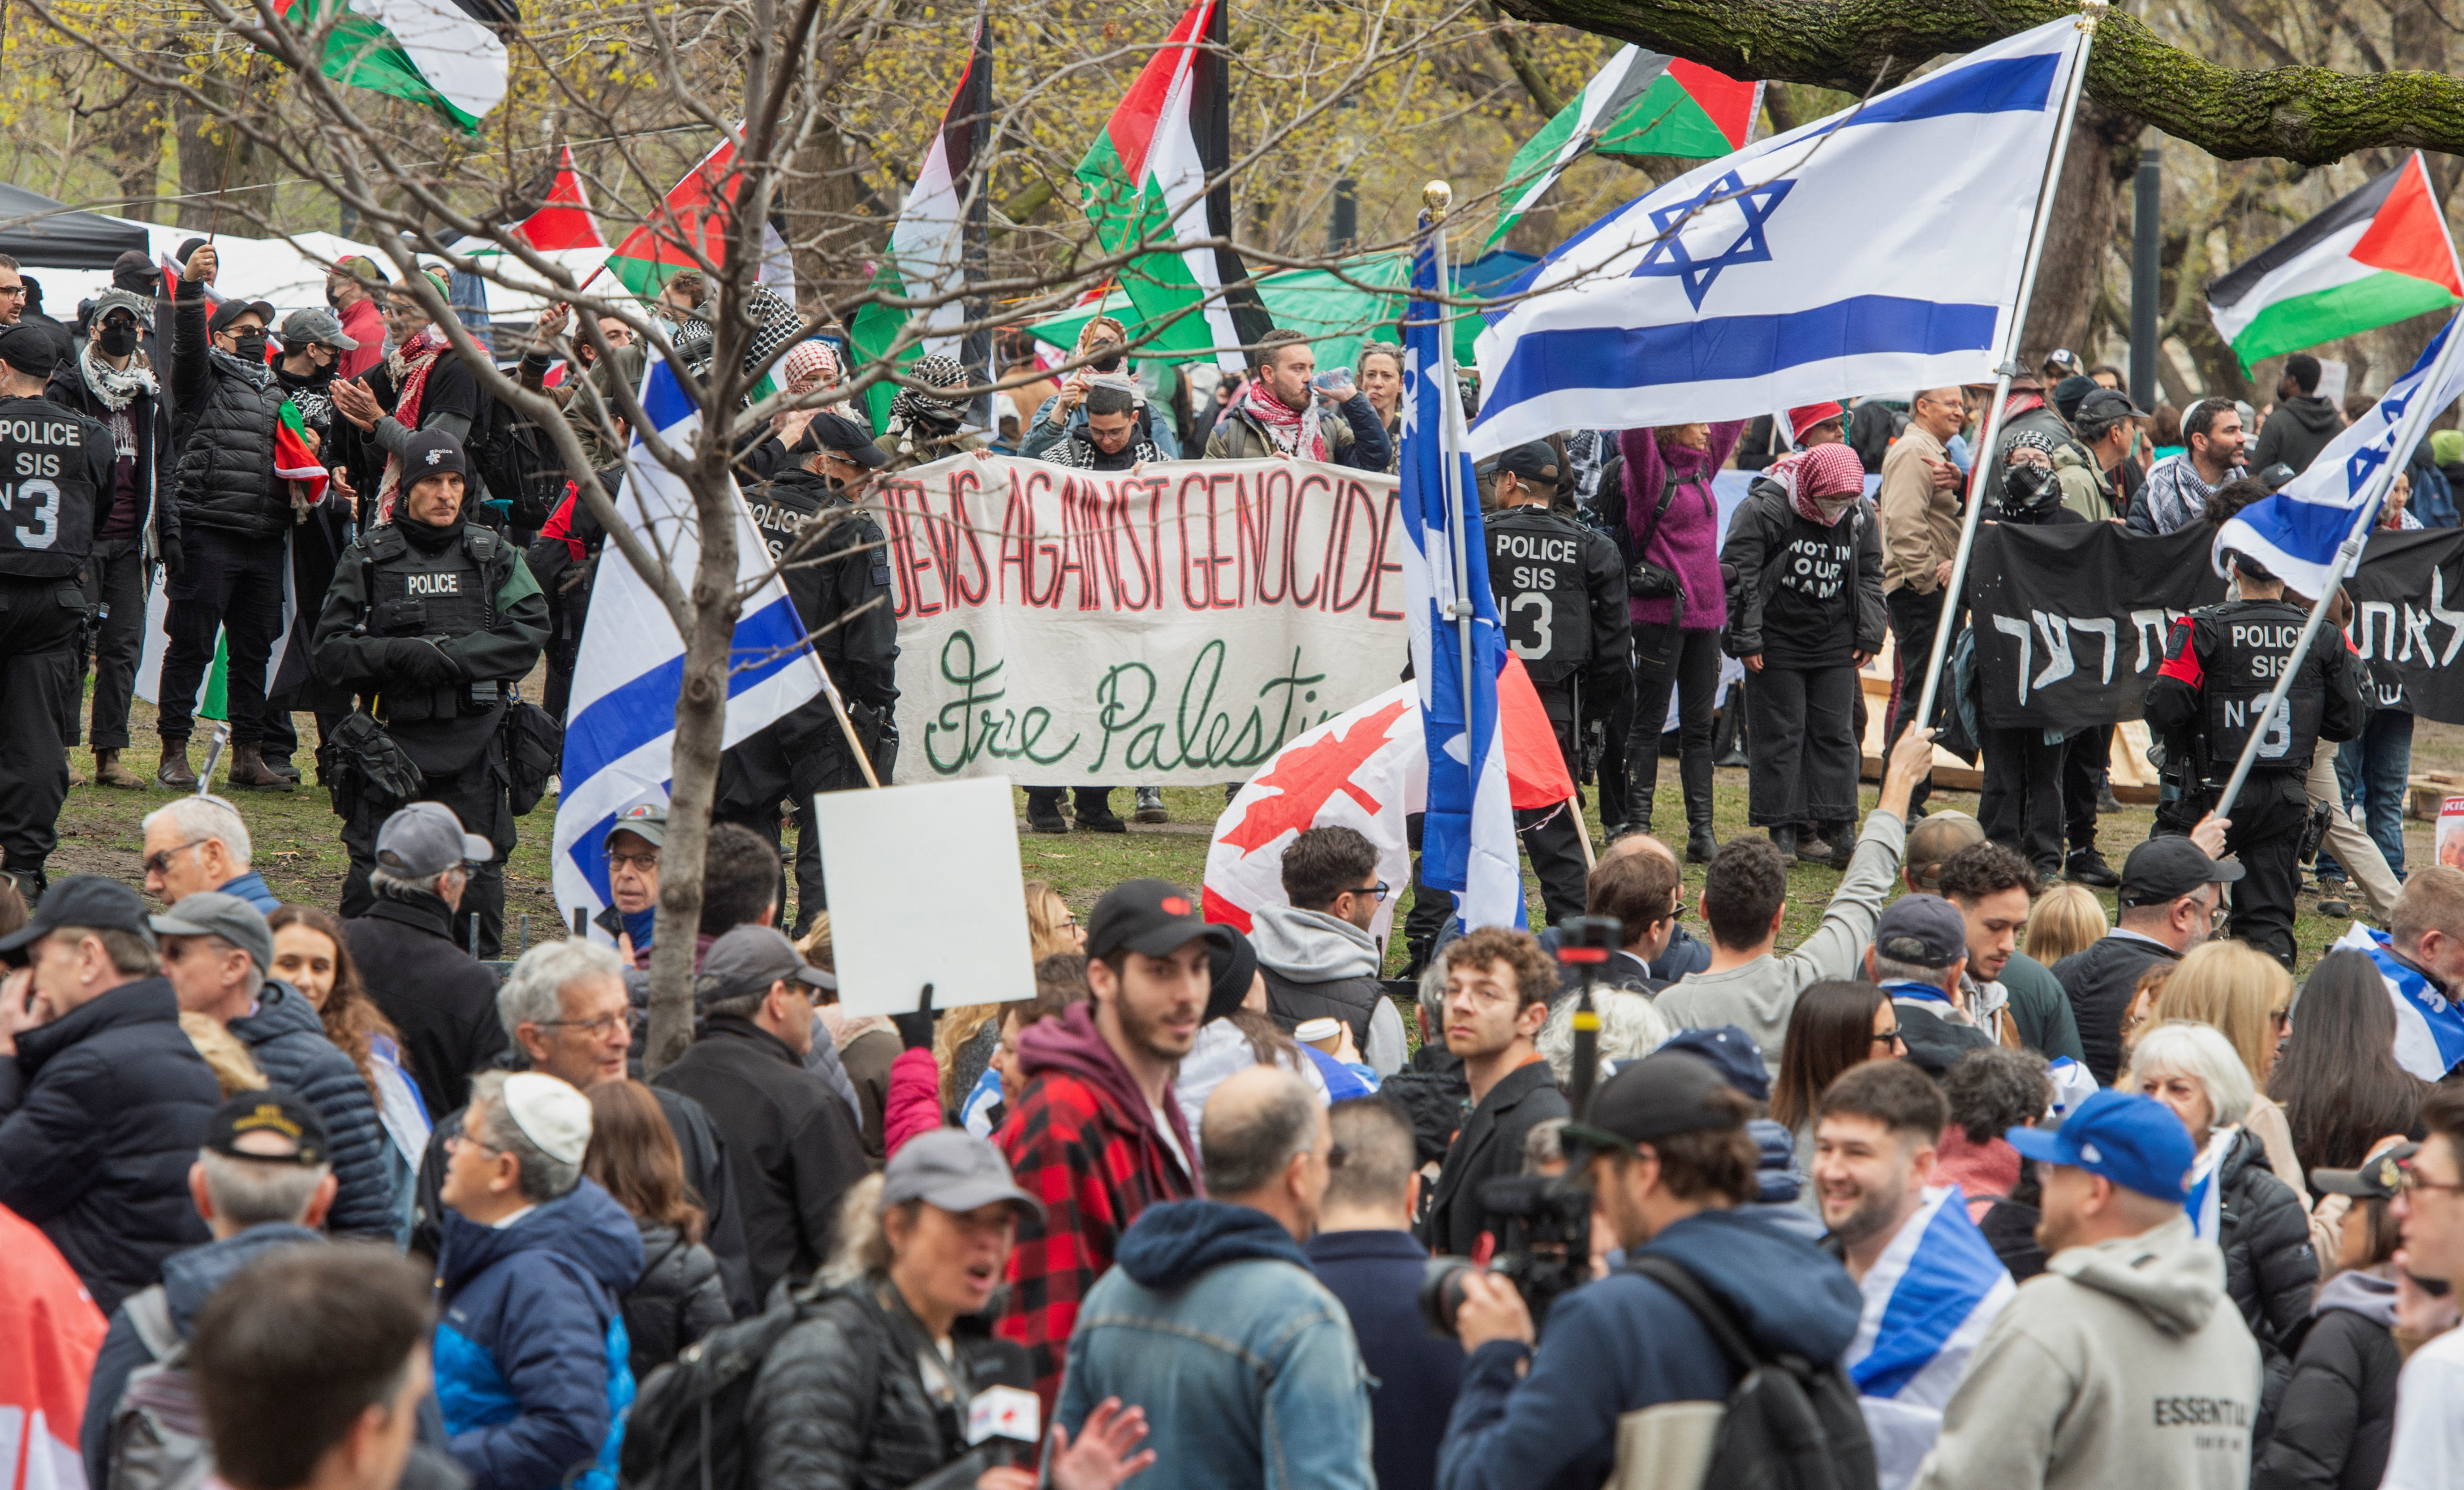 Protest encampment in support of Palestinians at McGill University in Montreal